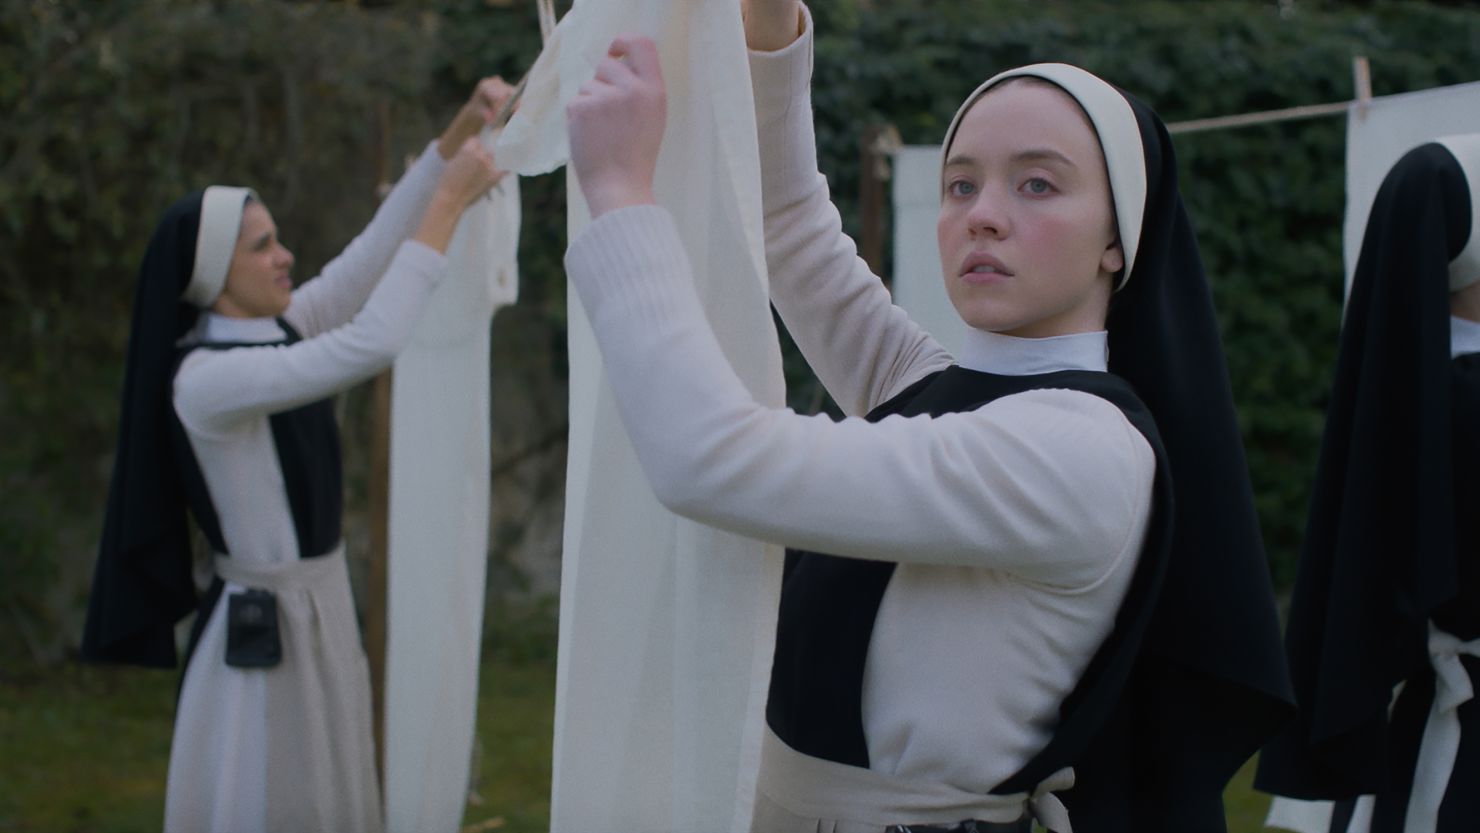 Sydney Sweeney plays a nun in the horror movie "Immaculate."